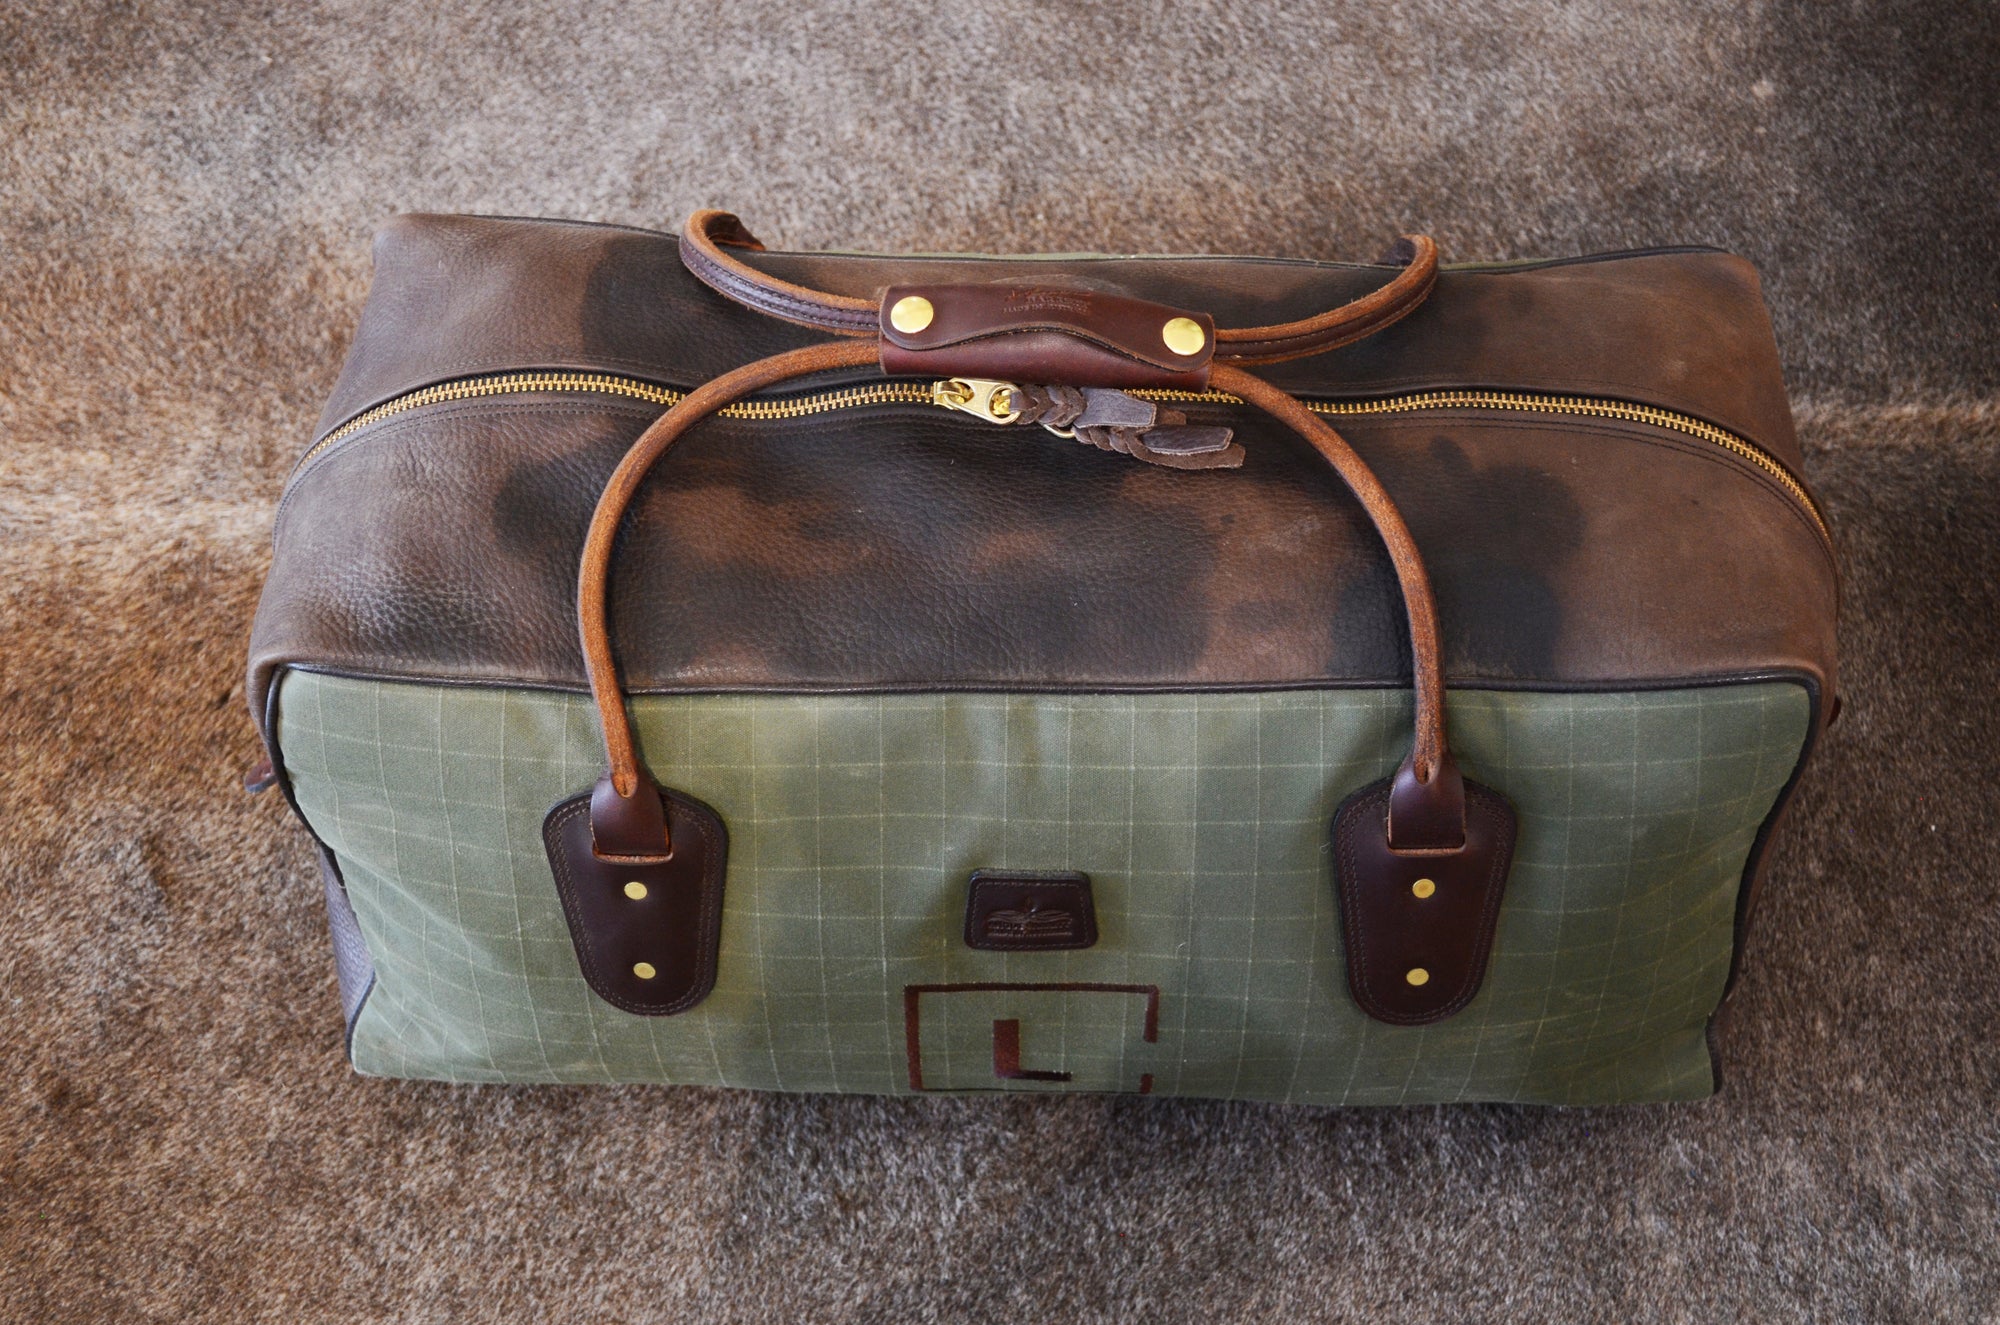 Weekender Travel Bags | Angus Barrett Saddlery and Leather Goods